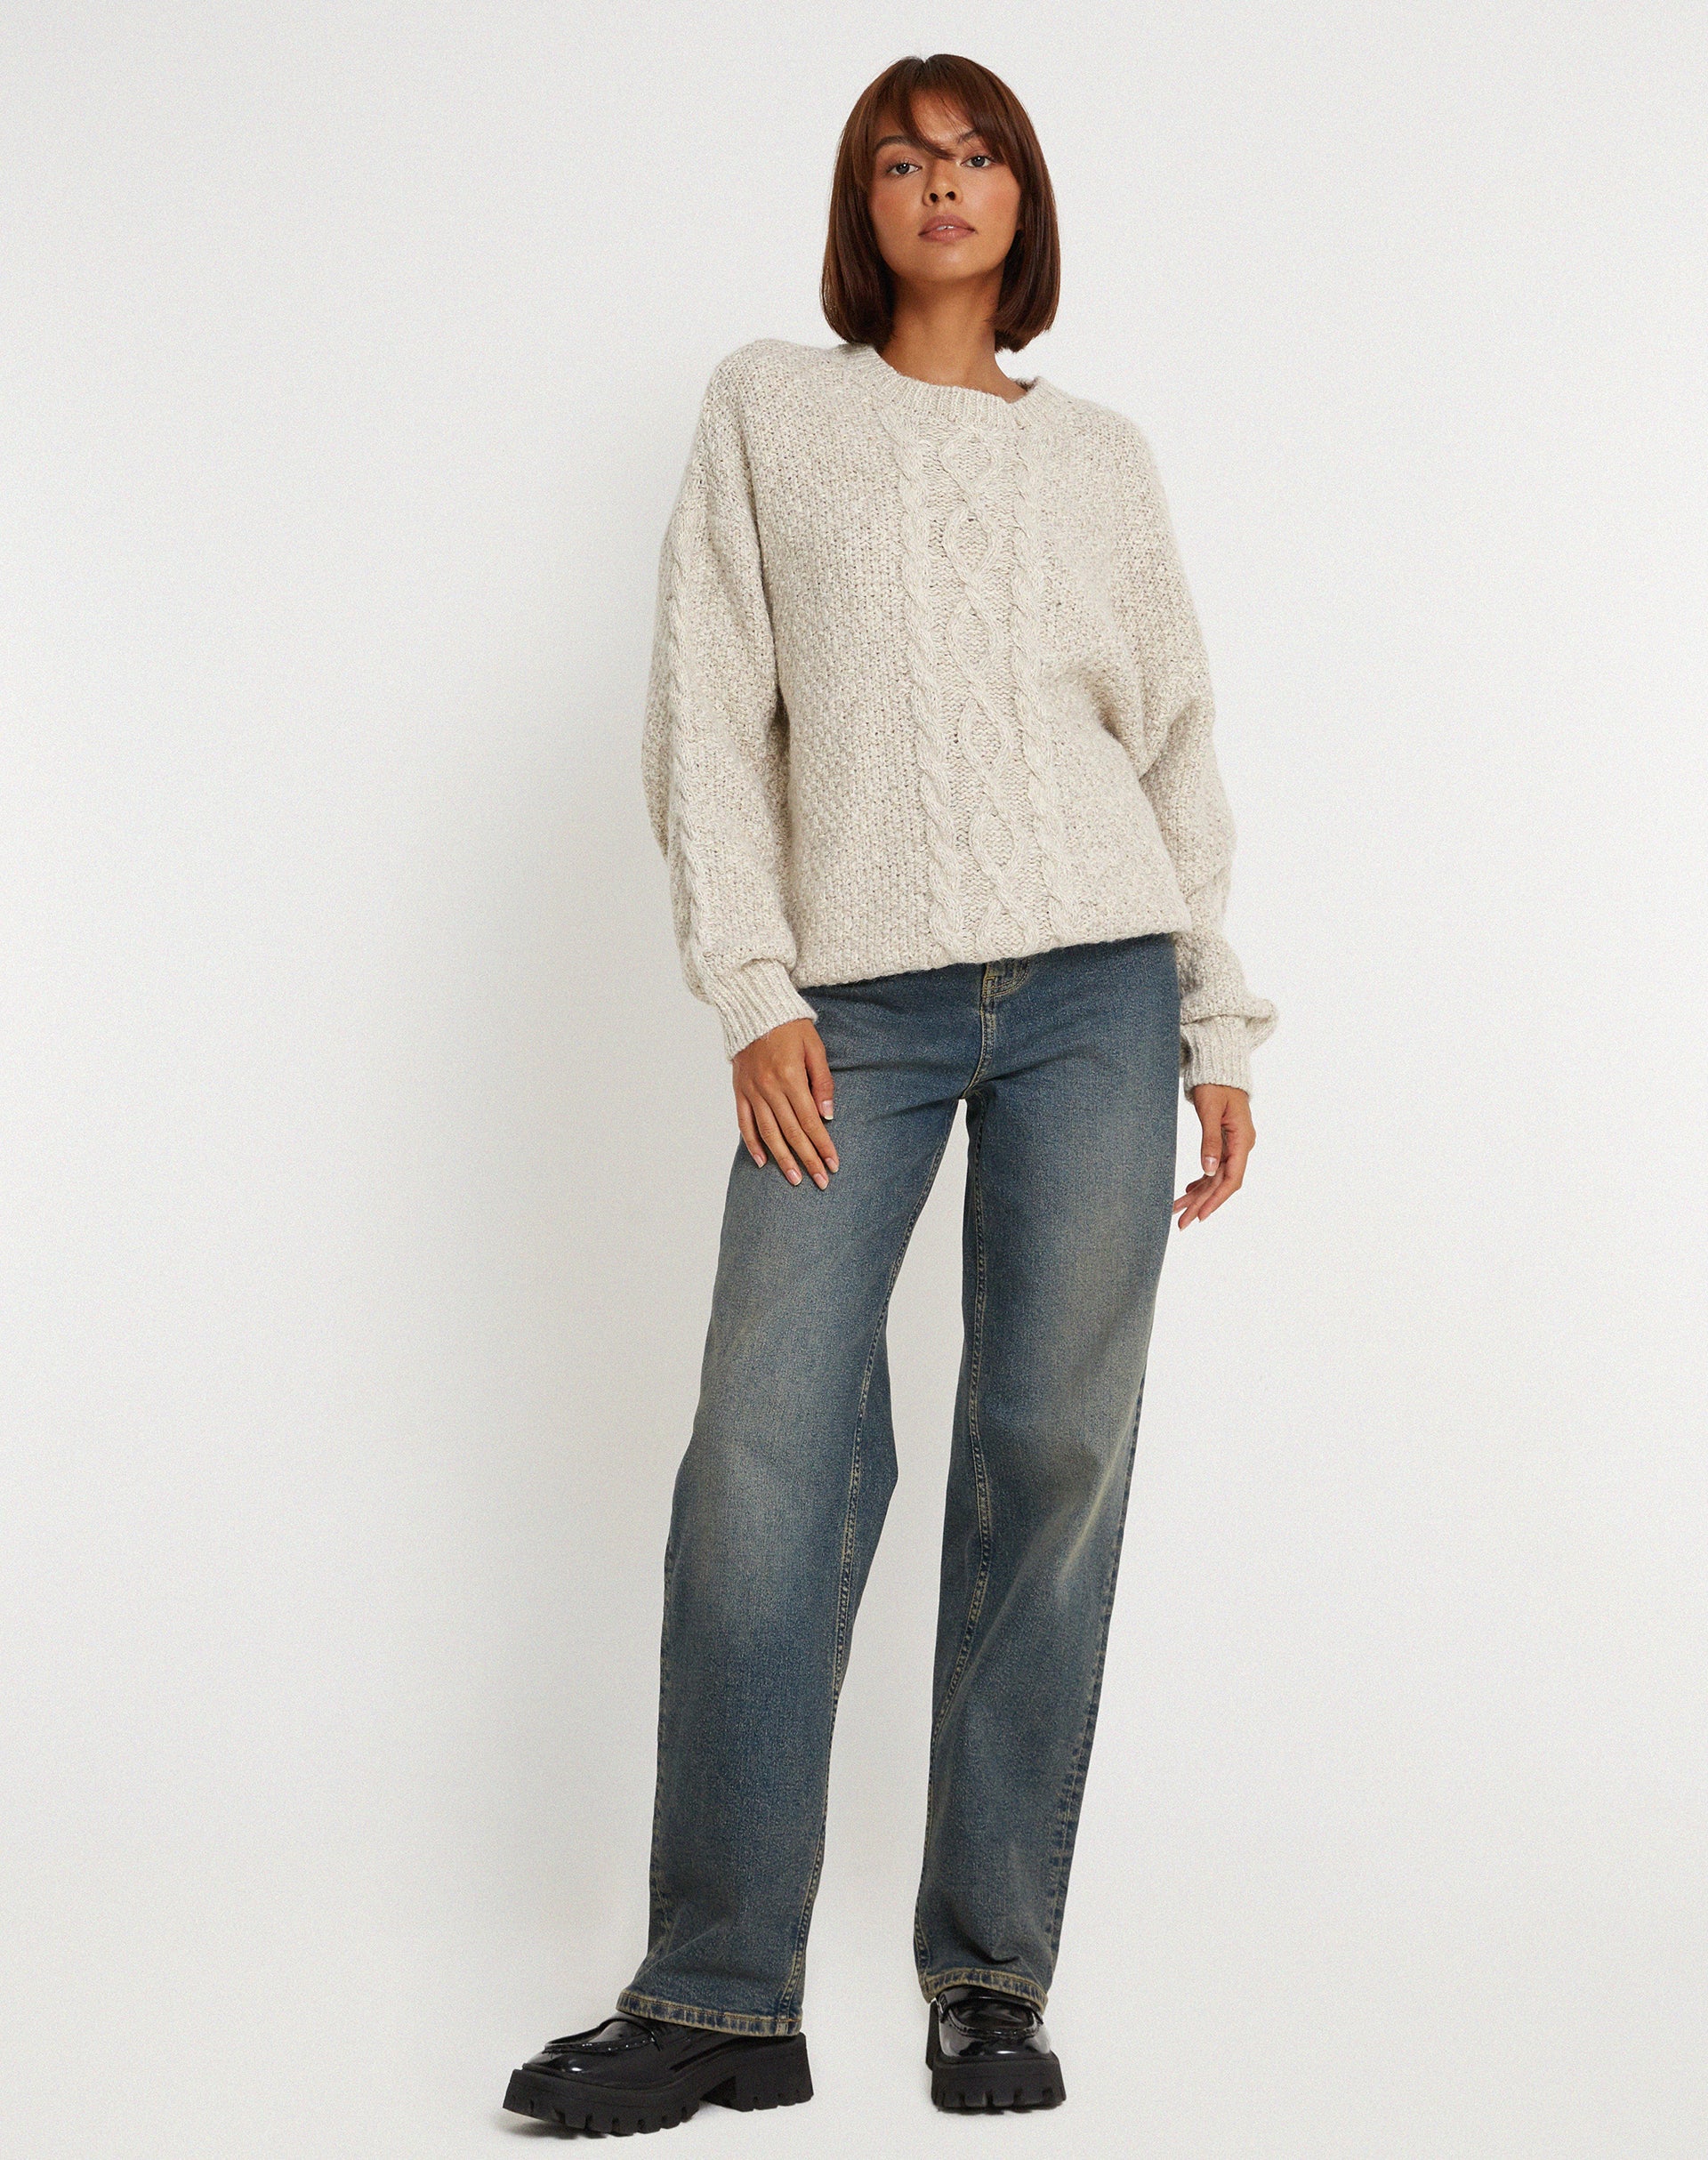 image of Chalih Jumper in Oatmeal